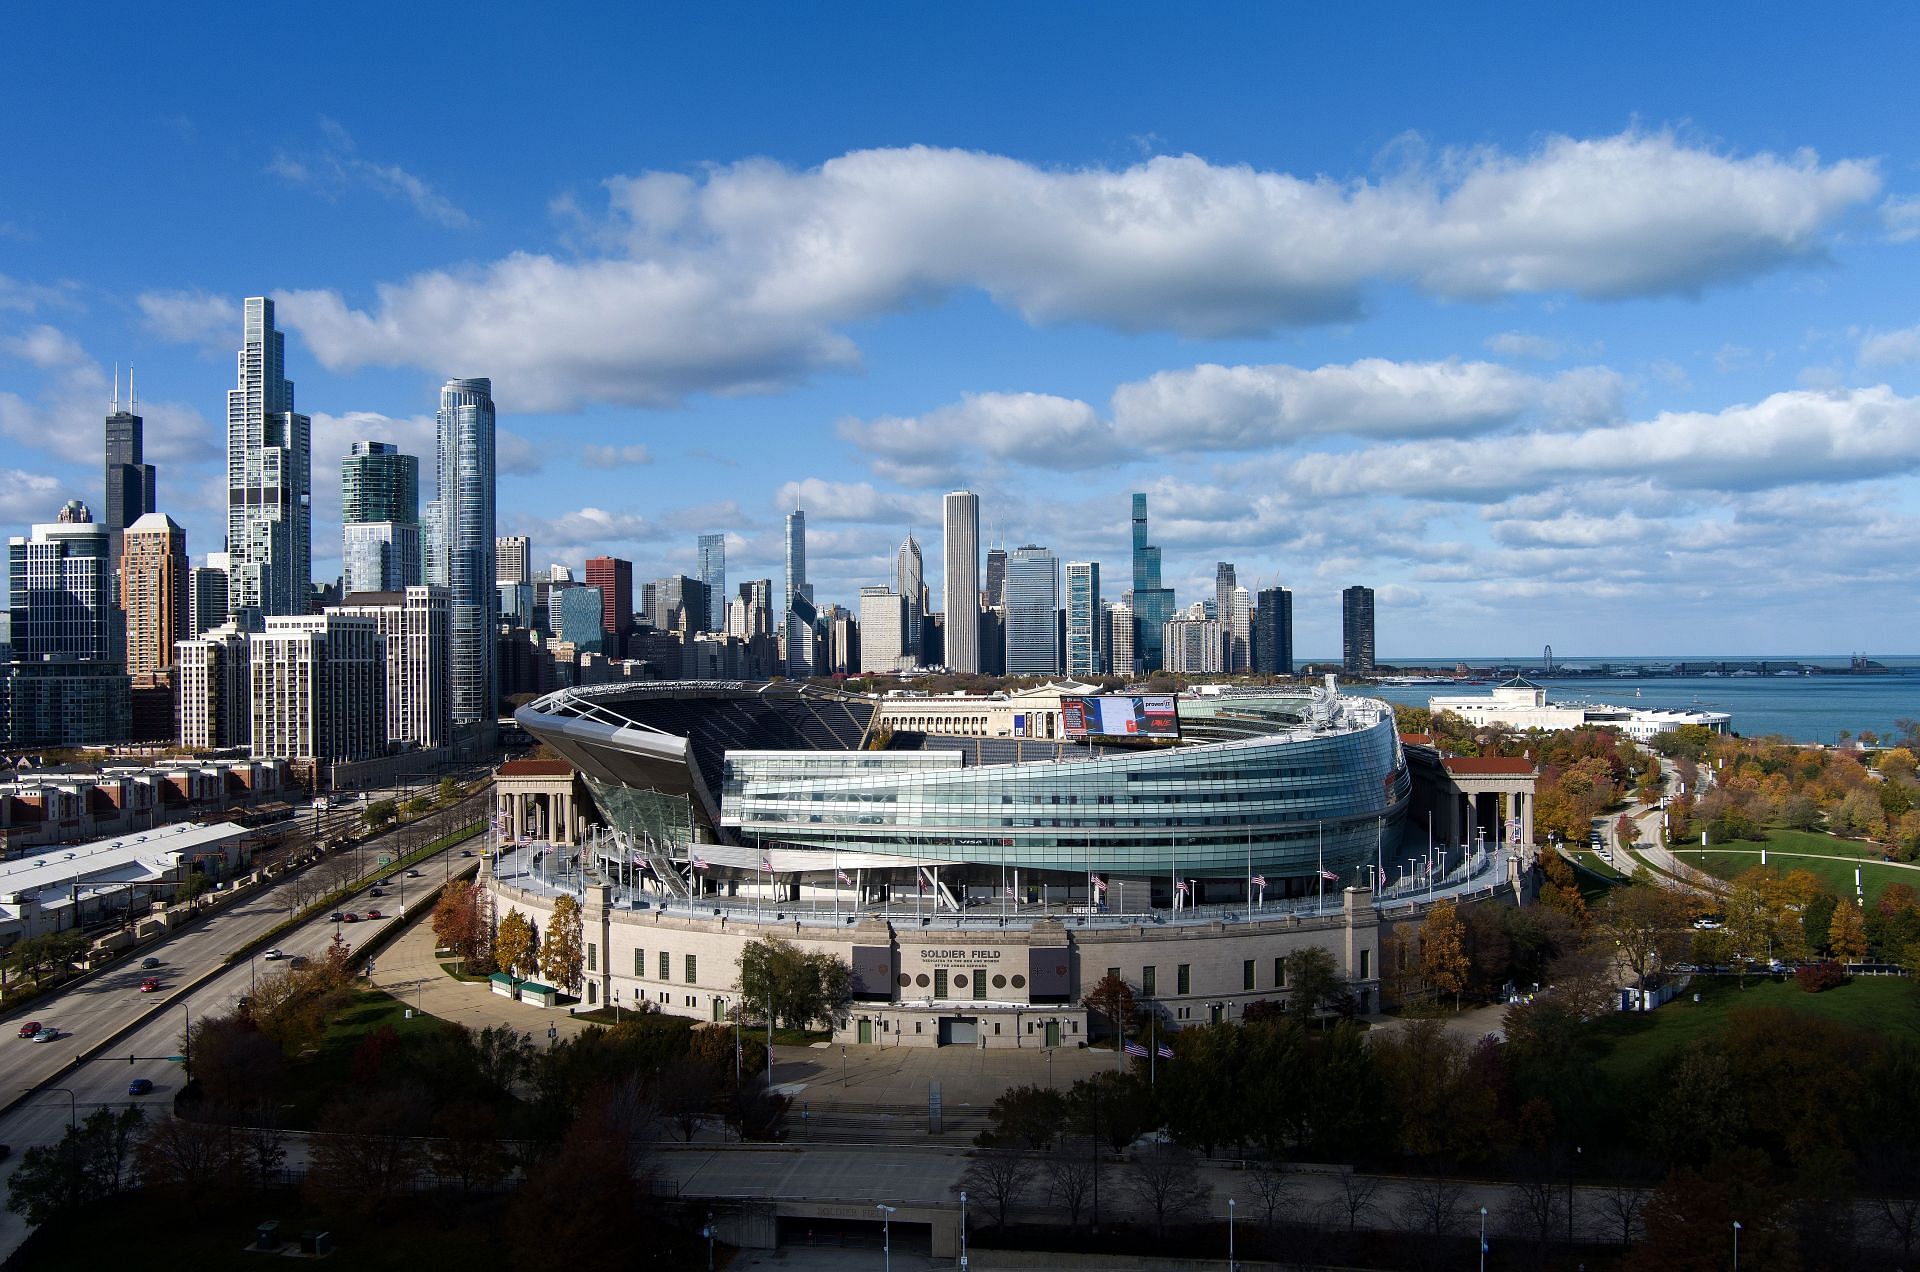 Historic NFL stadium Soldier Field, home to the Chicago Bears